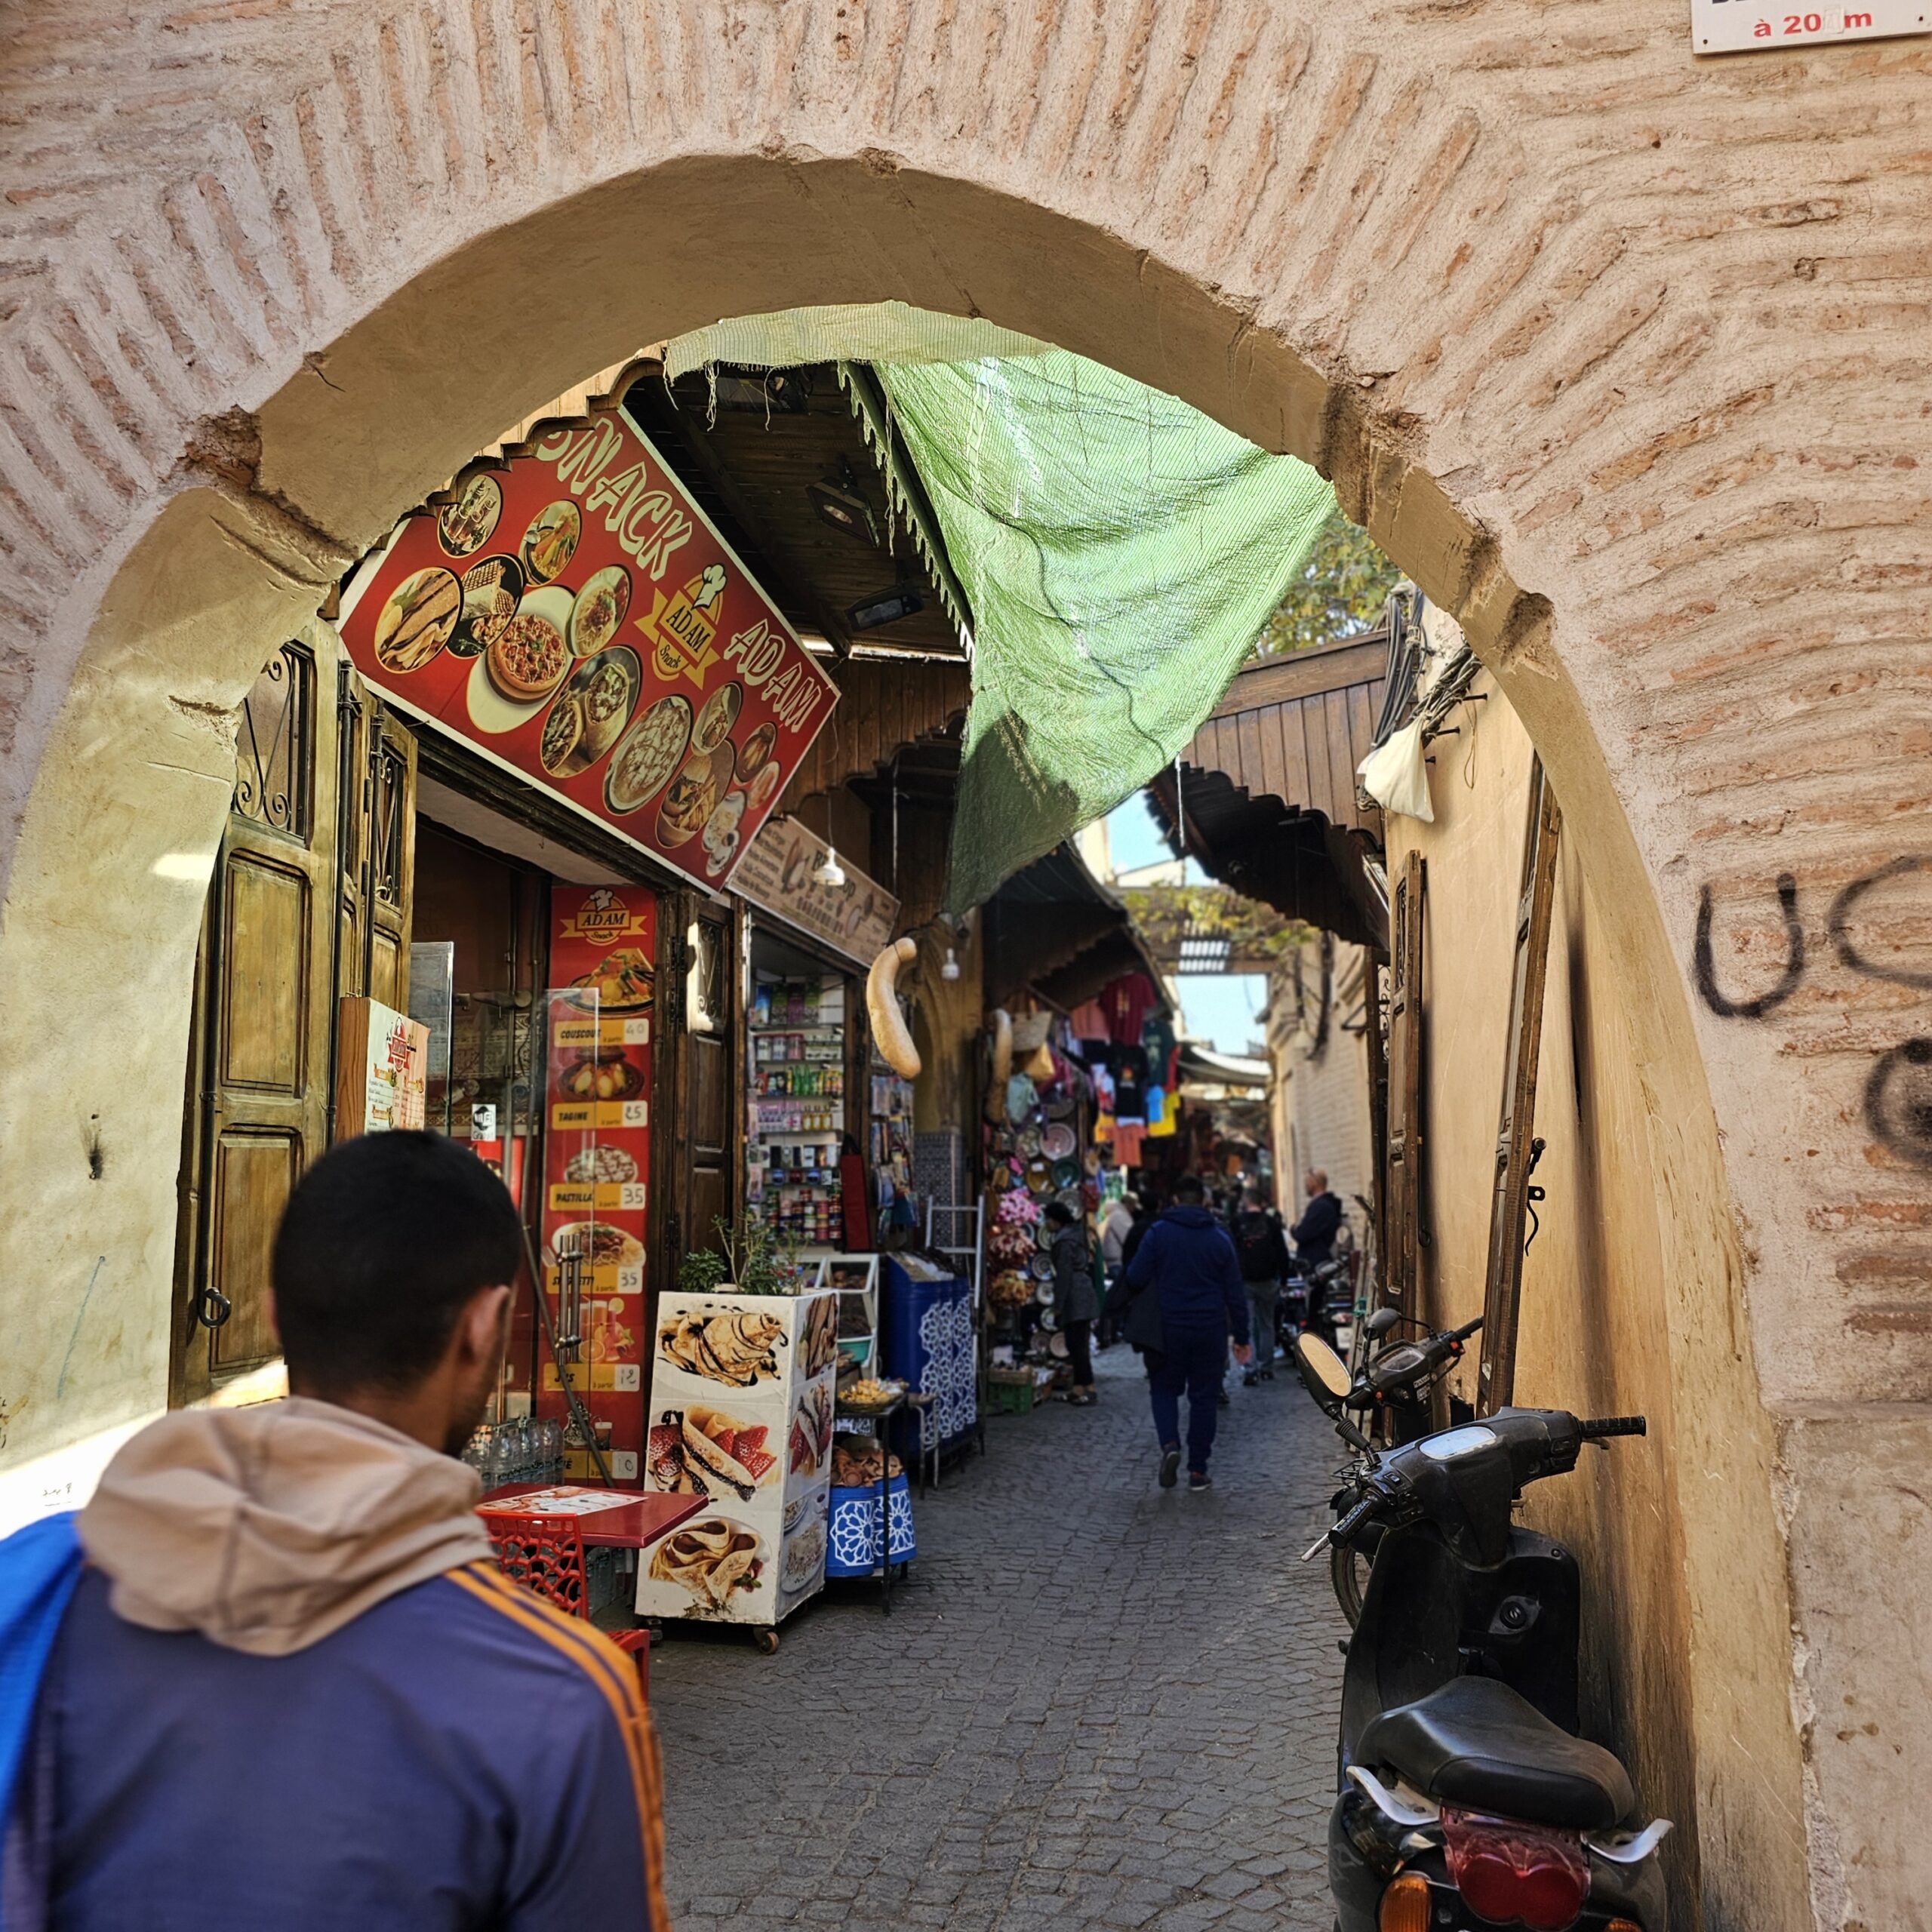 A small side street, through an archway, one of many in Jemaa El Fnaa, Marrakesh. Image by 360onhistory.com